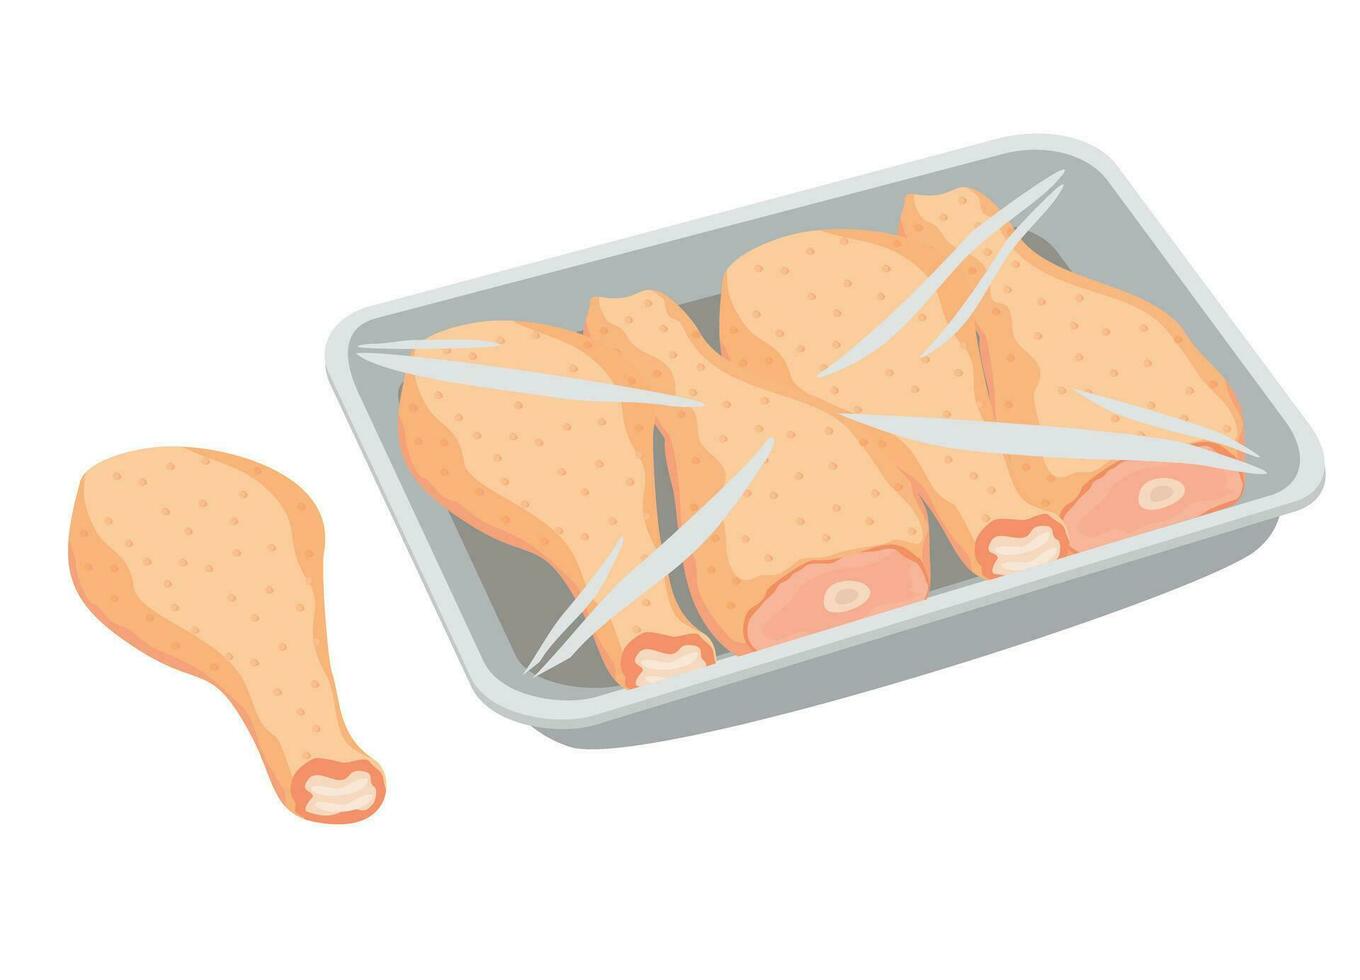 Chicken legs in vacuum plastic packaging. Chicken farm composition with isolated image of semi finished product package with chicken legs cartoon vector